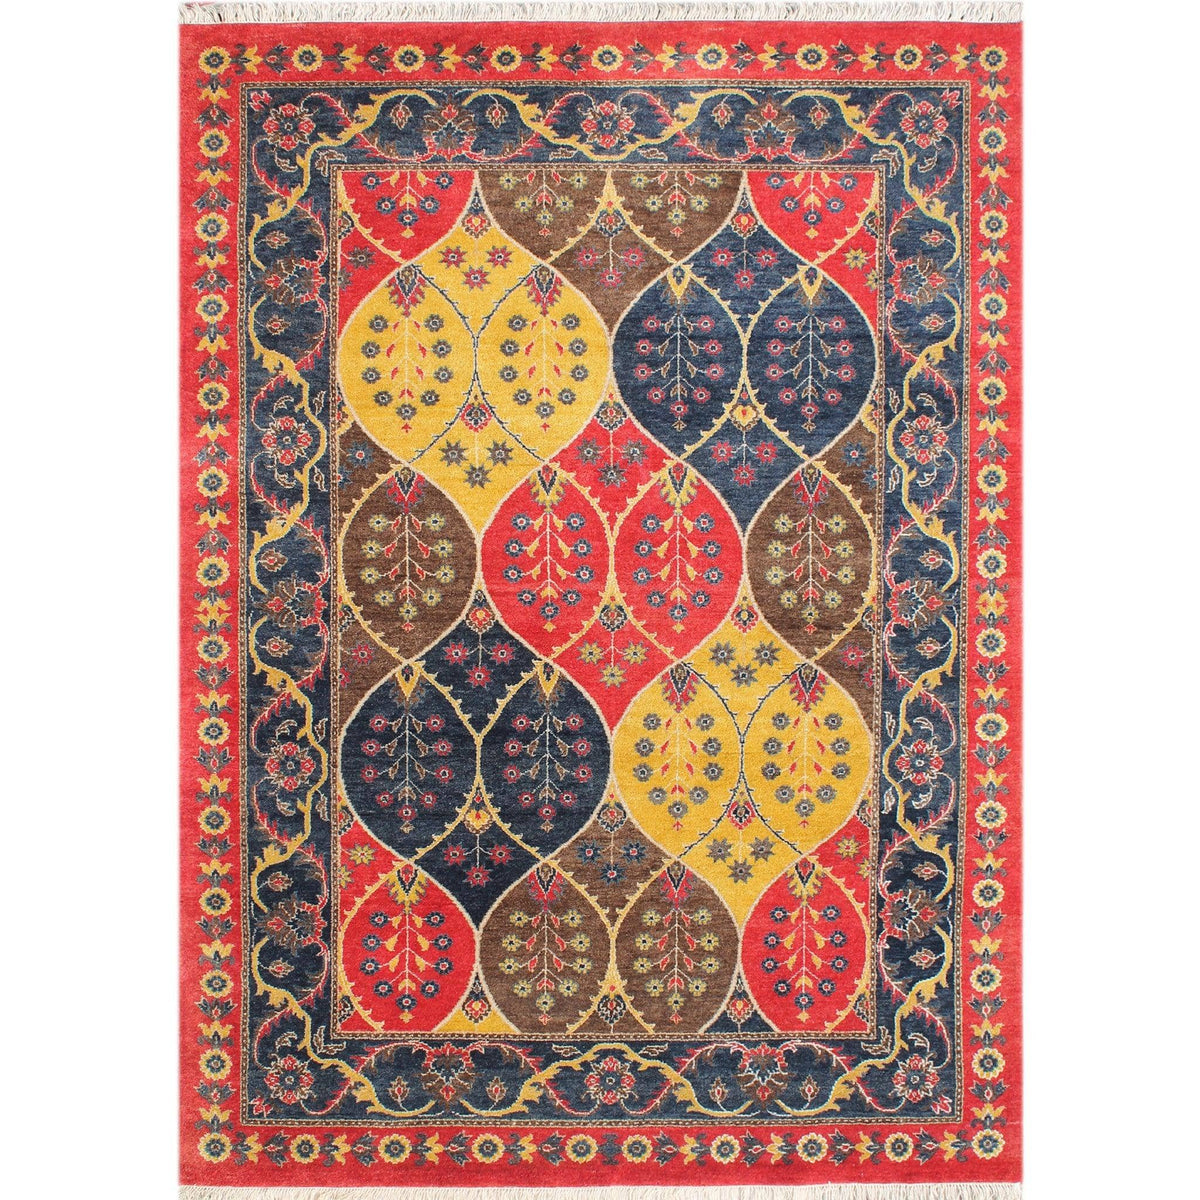 Fine Hand-knotted Wool Patch Weave Rug 170cm x 242cm